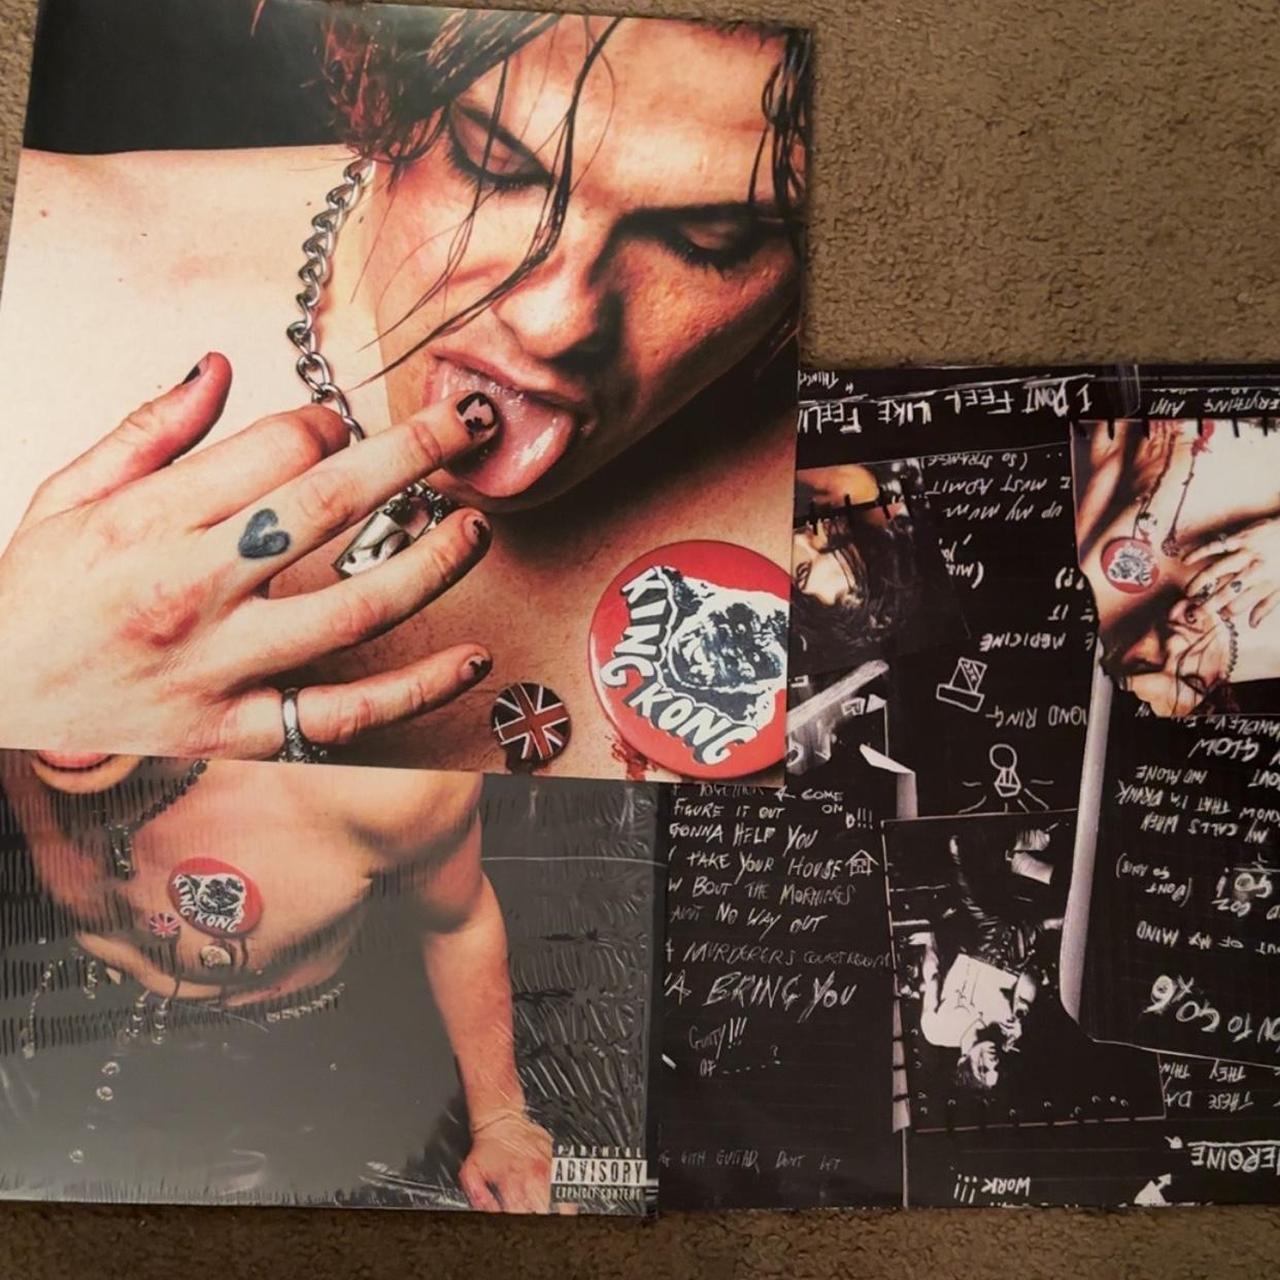 Yungblud target exclusive vinyl, never played opened - Depop